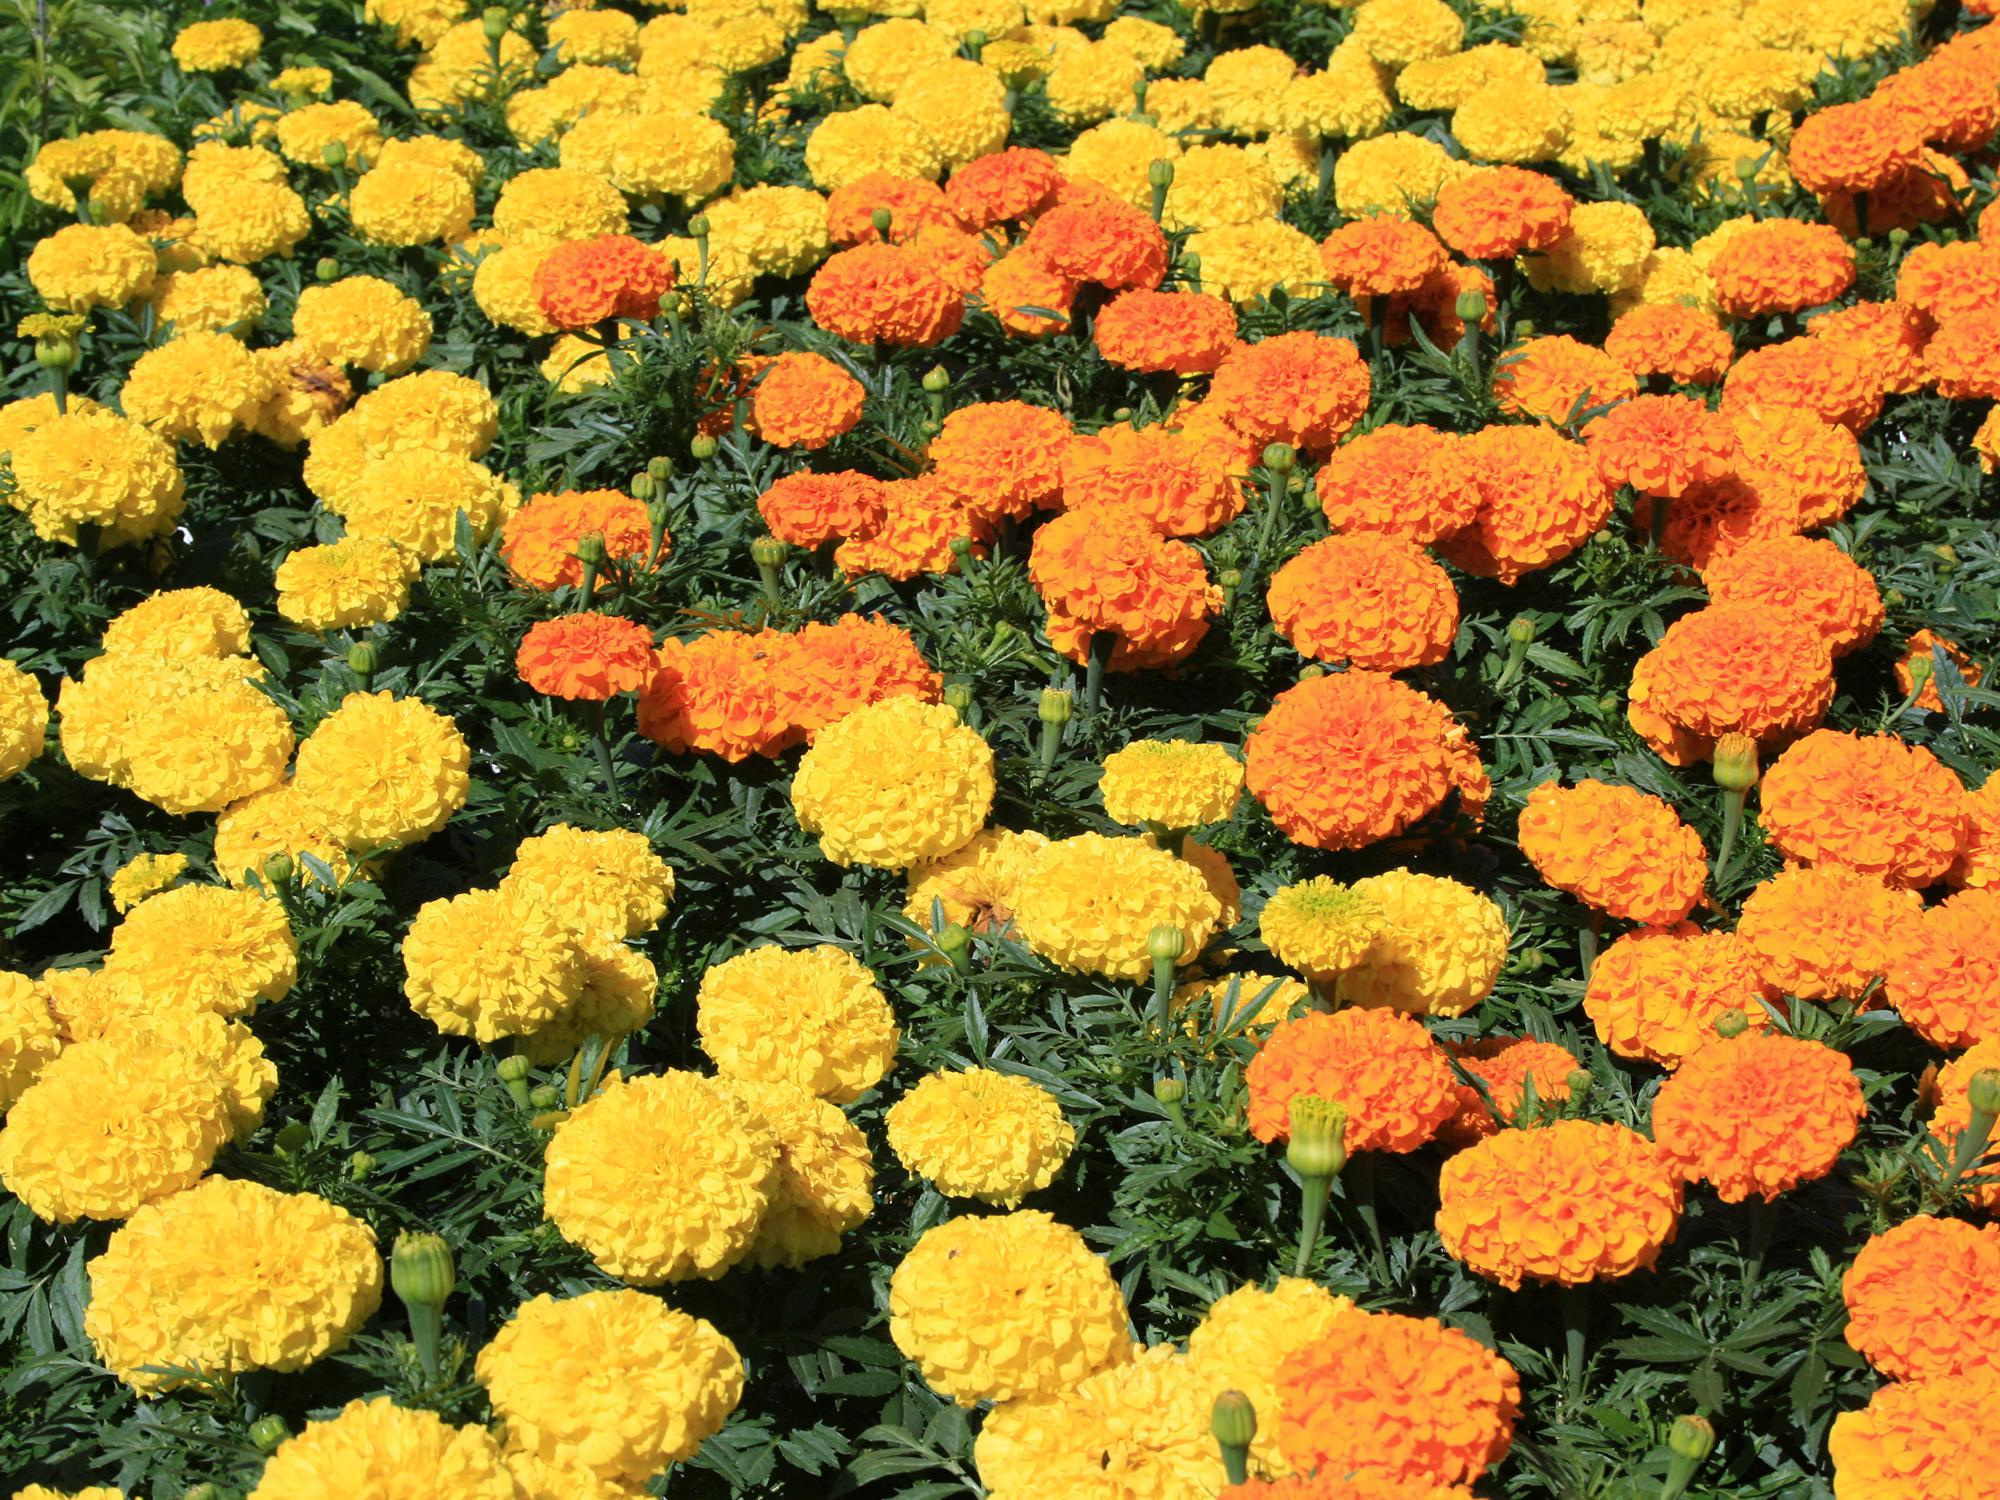 American marigolds are often called African marigolds. The Antigua series is popular, such as this orange-and-yellow variety. (Photo by MSU Extension/Gary Bachman)